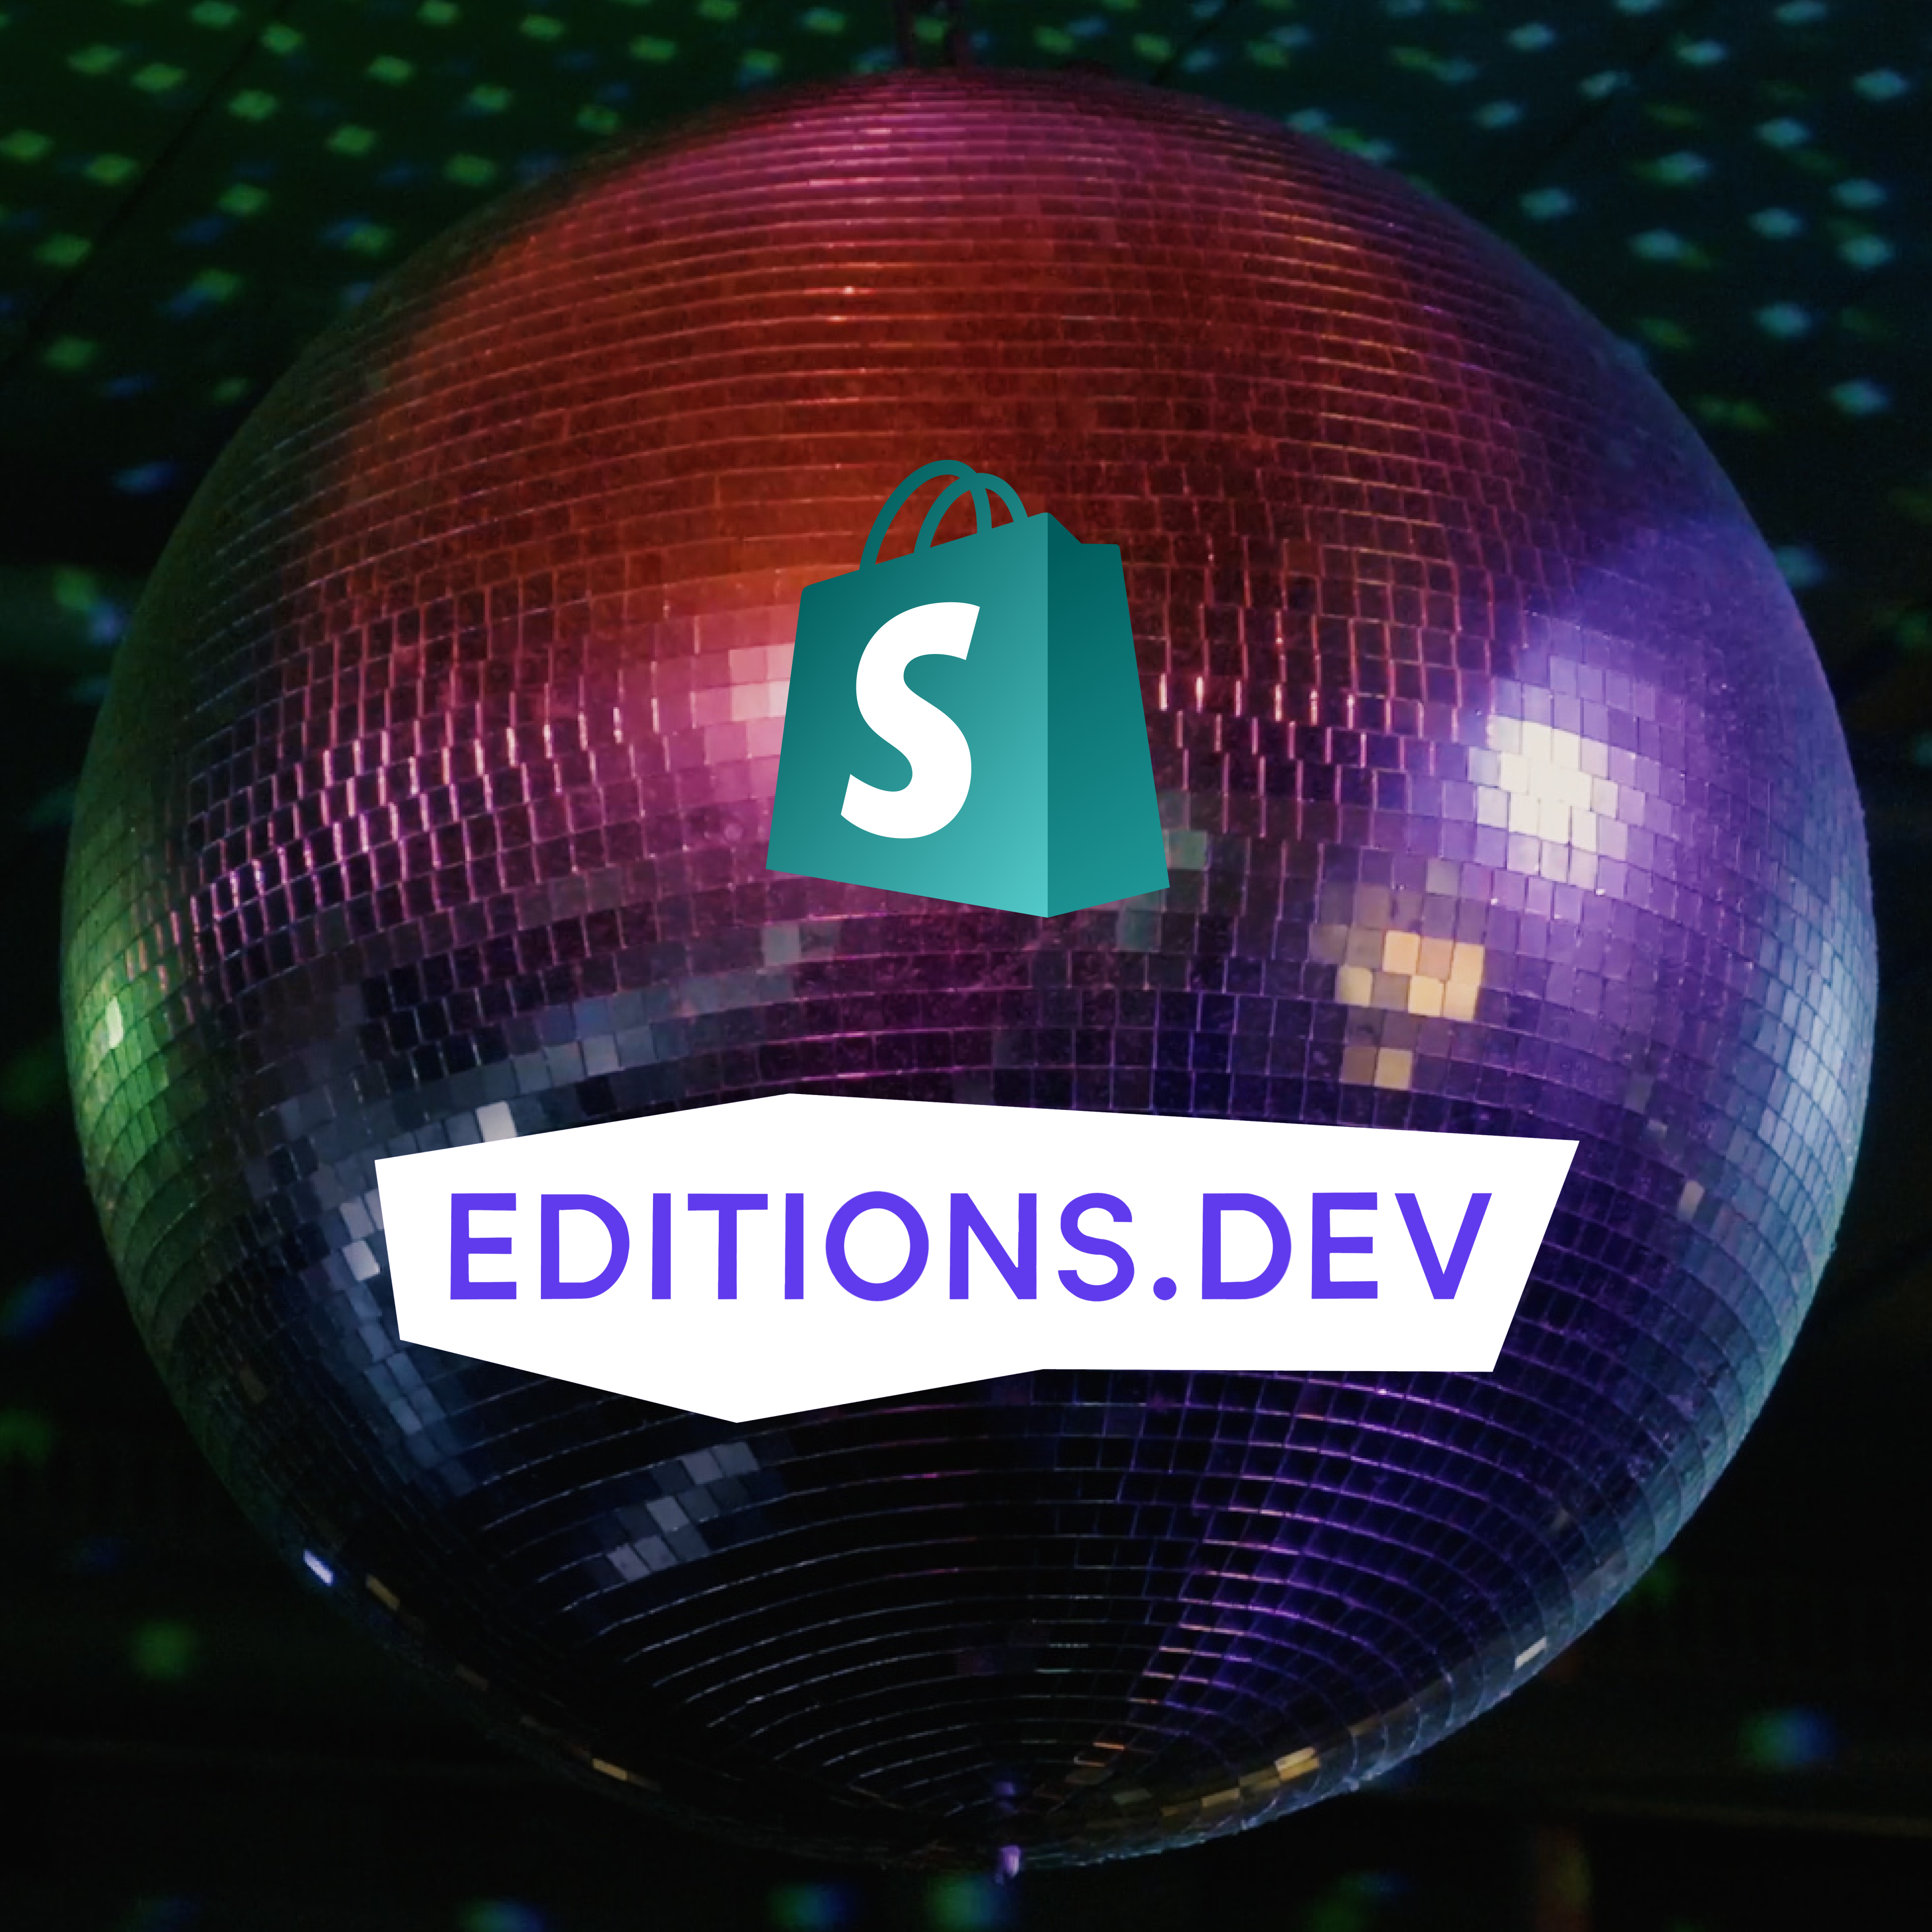 Shopify Editions logo and Shopify Editions.dev logo superimposed on an image of a disco ball.